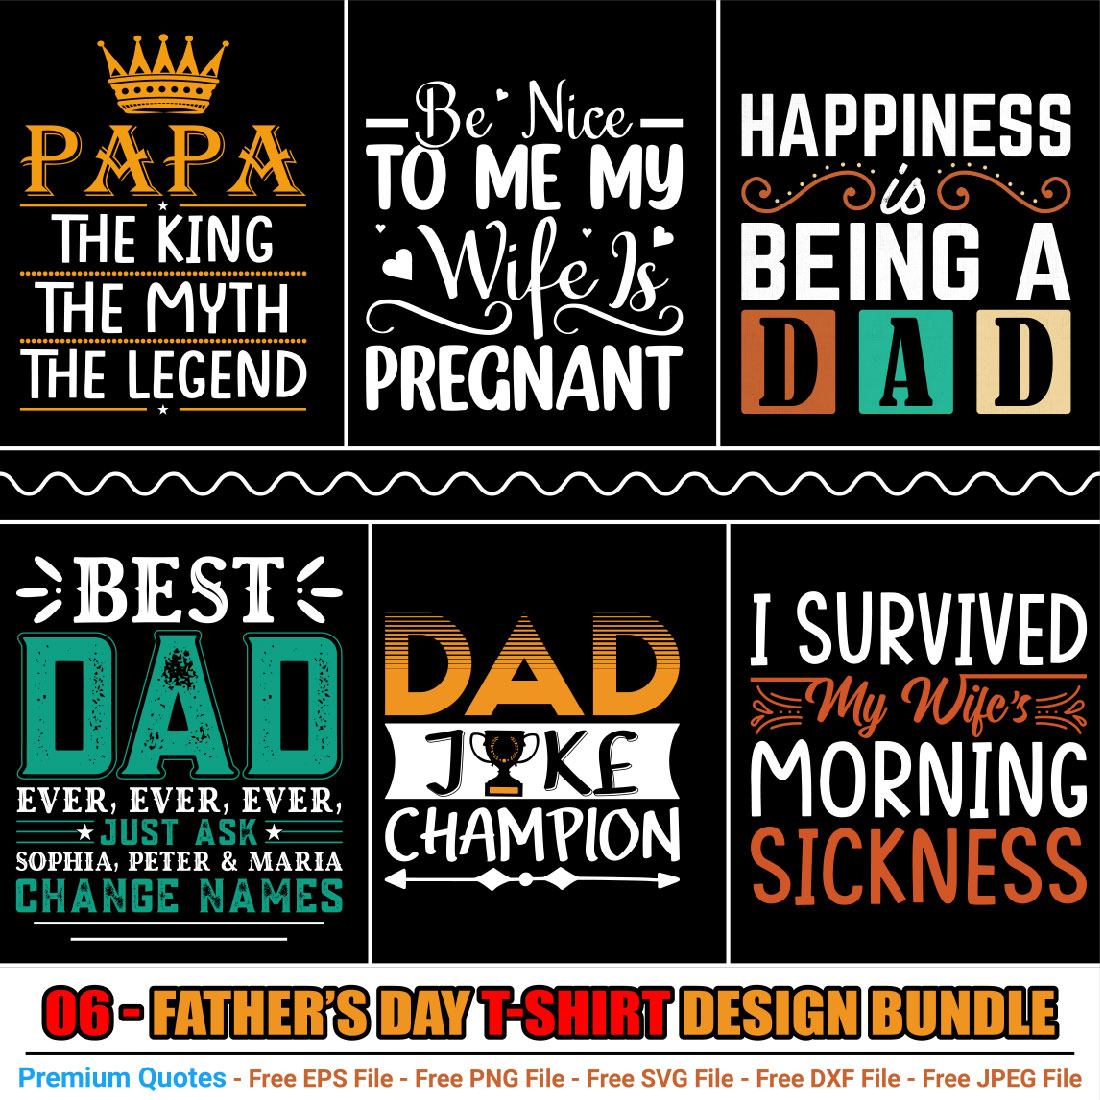 Father’s Day T-shirt Design Bundle preview image.